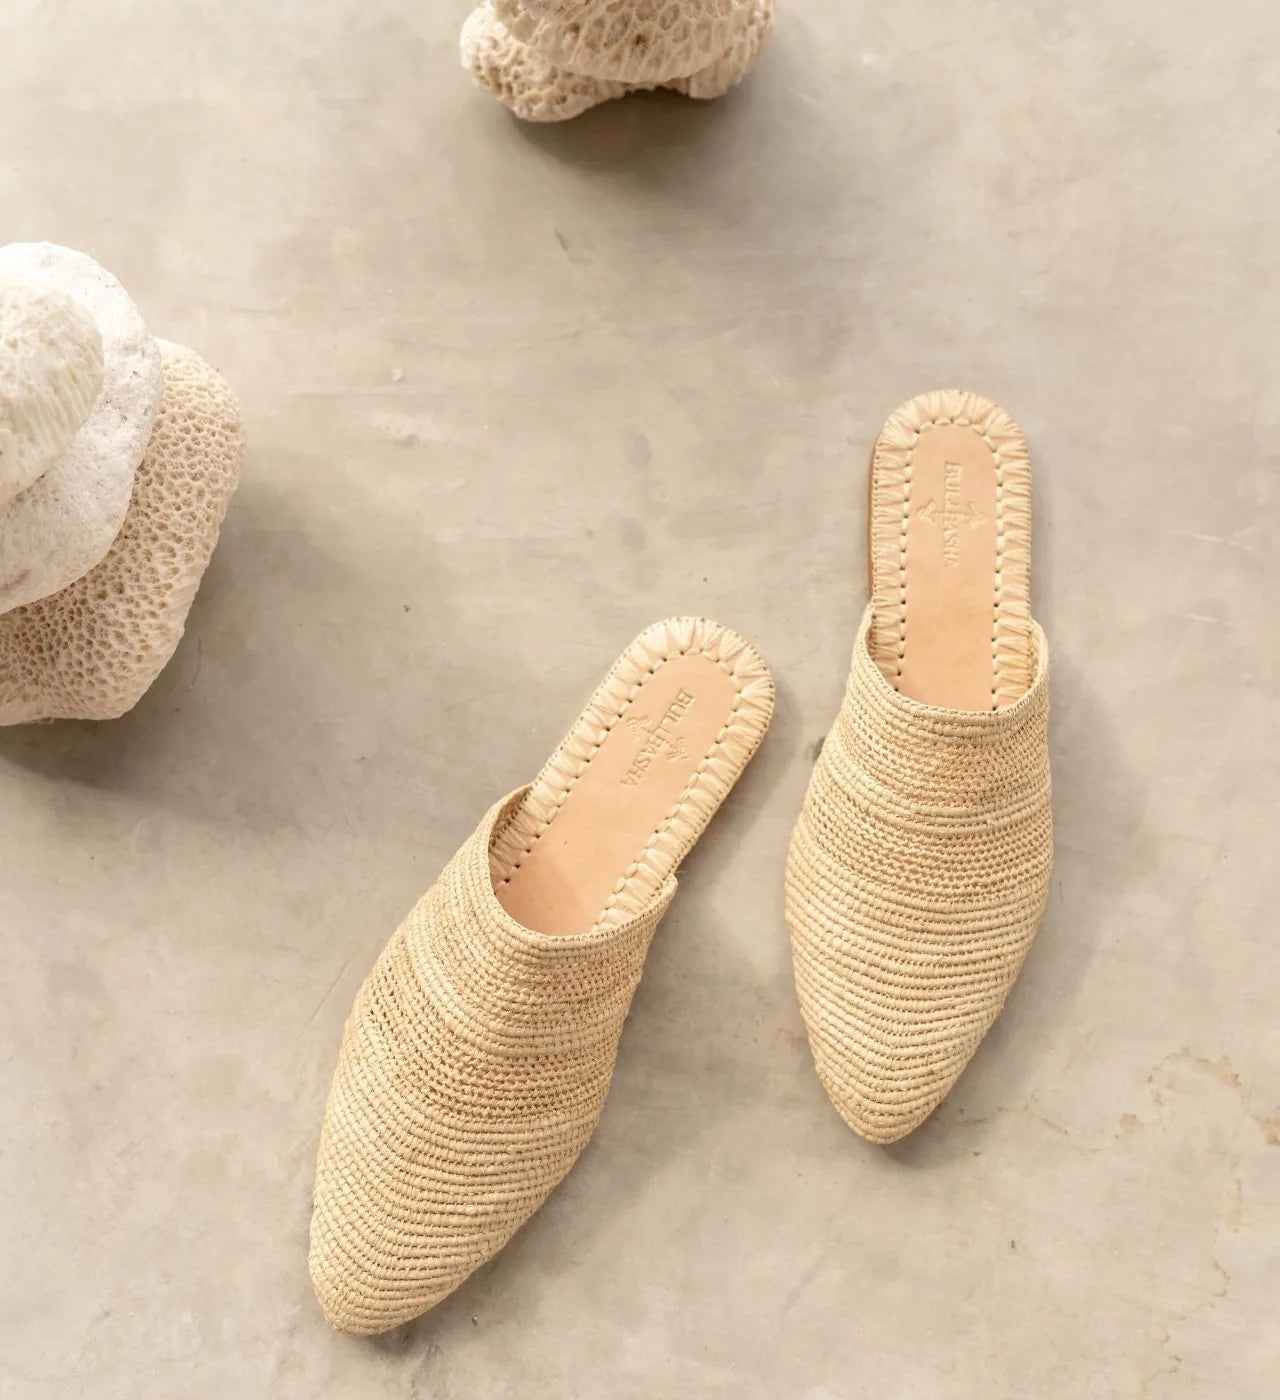 Babouche Tayri, sustainable, handmade sandals made from natural materials by Bulibasha